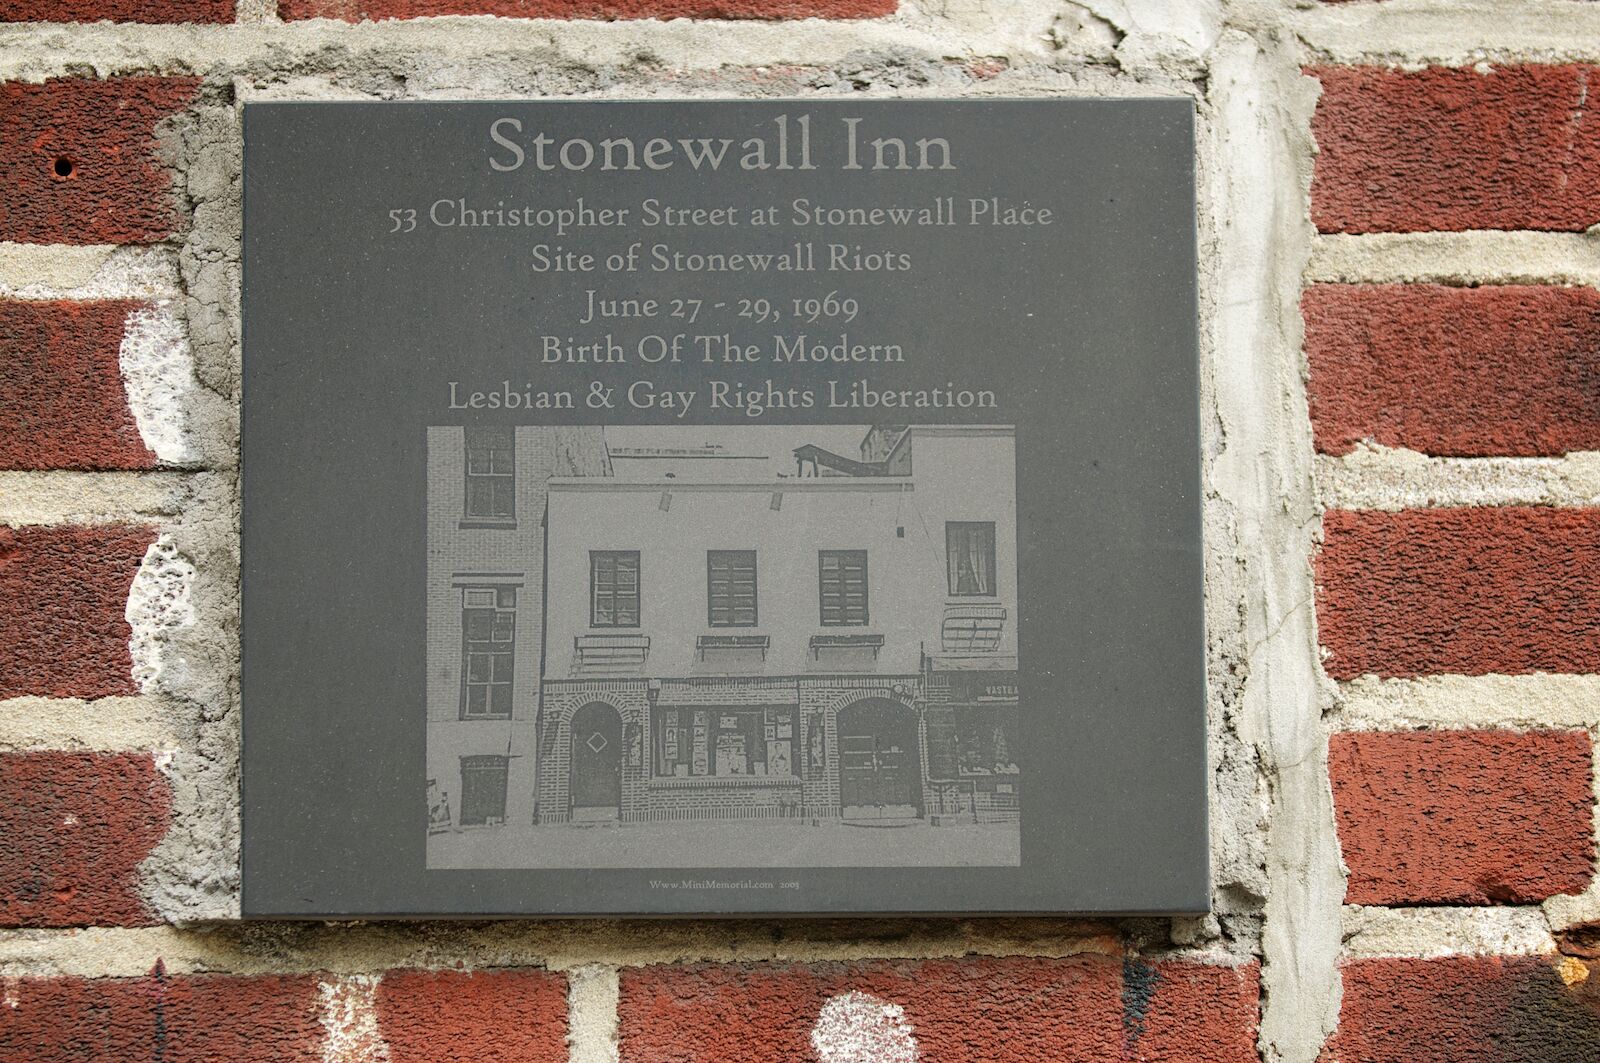 NEW YORK CITY - AUGUST 26, 2011: A memorial plaque hangs on the Stonewall Inn on Christopher Street, the site of the Stonewall riots of 1969, a catalyst for the gay liberation movement.